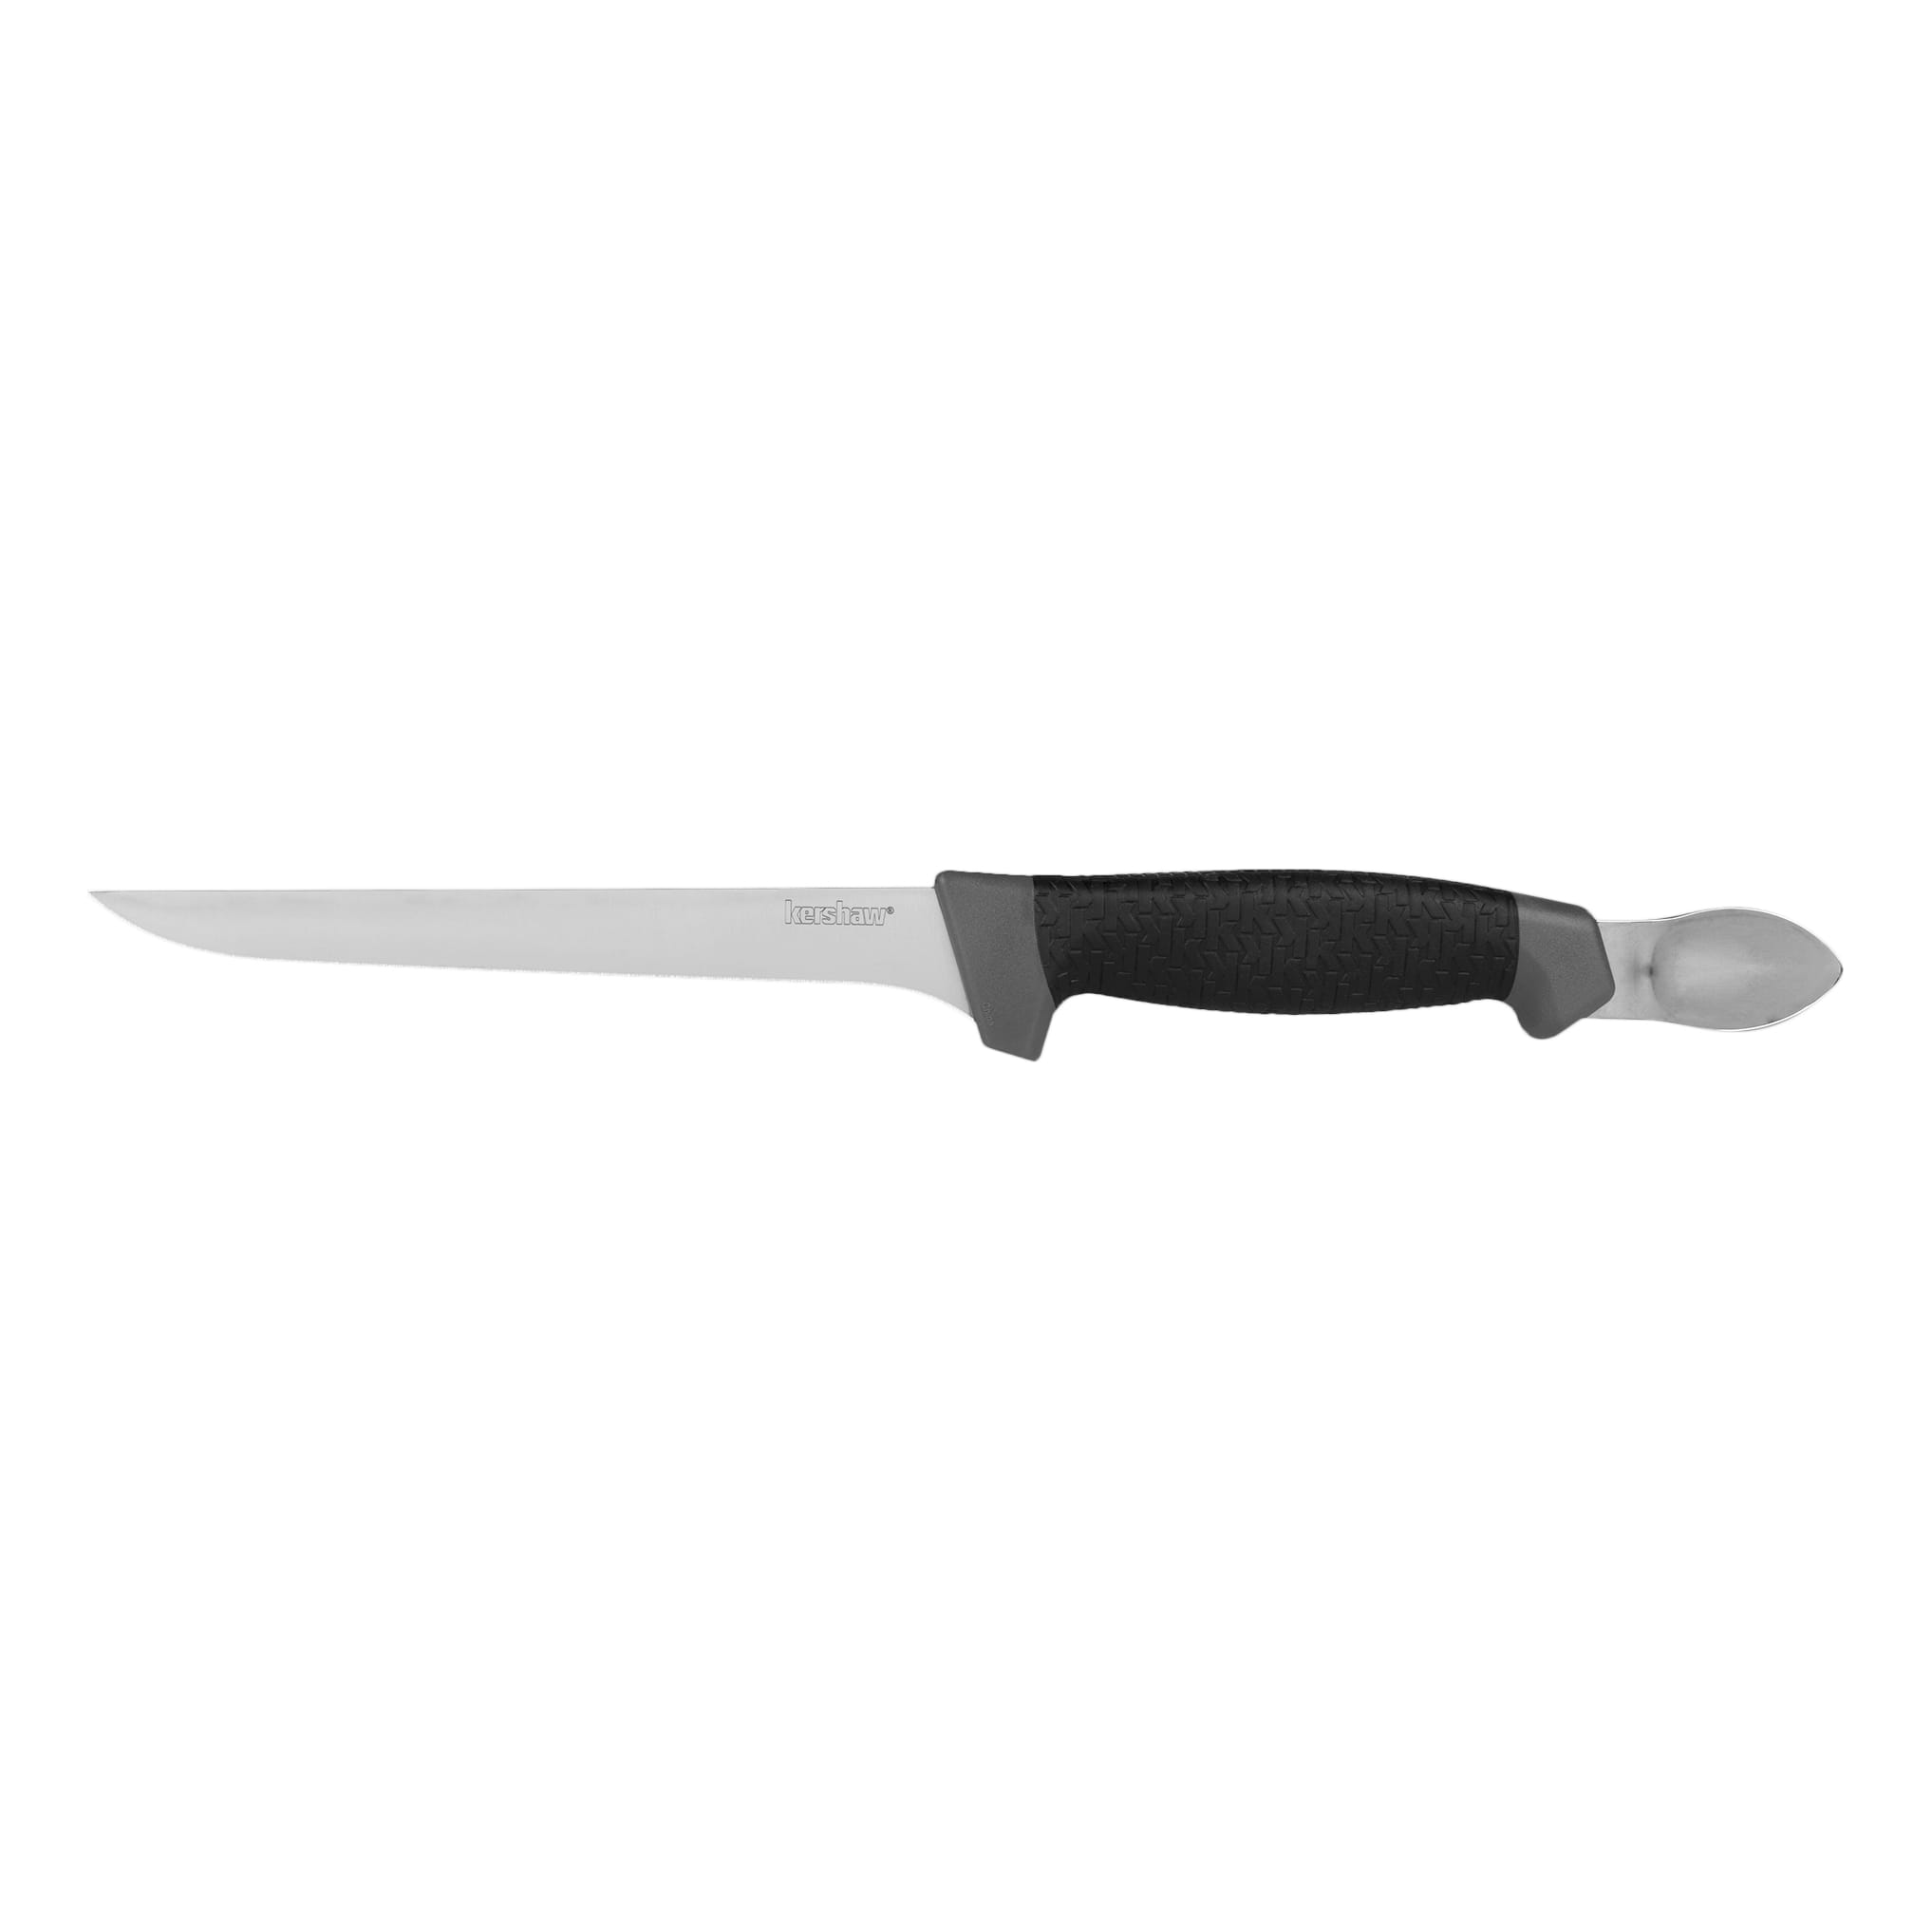 Kershaw® 7” Boning Knife with Spoon